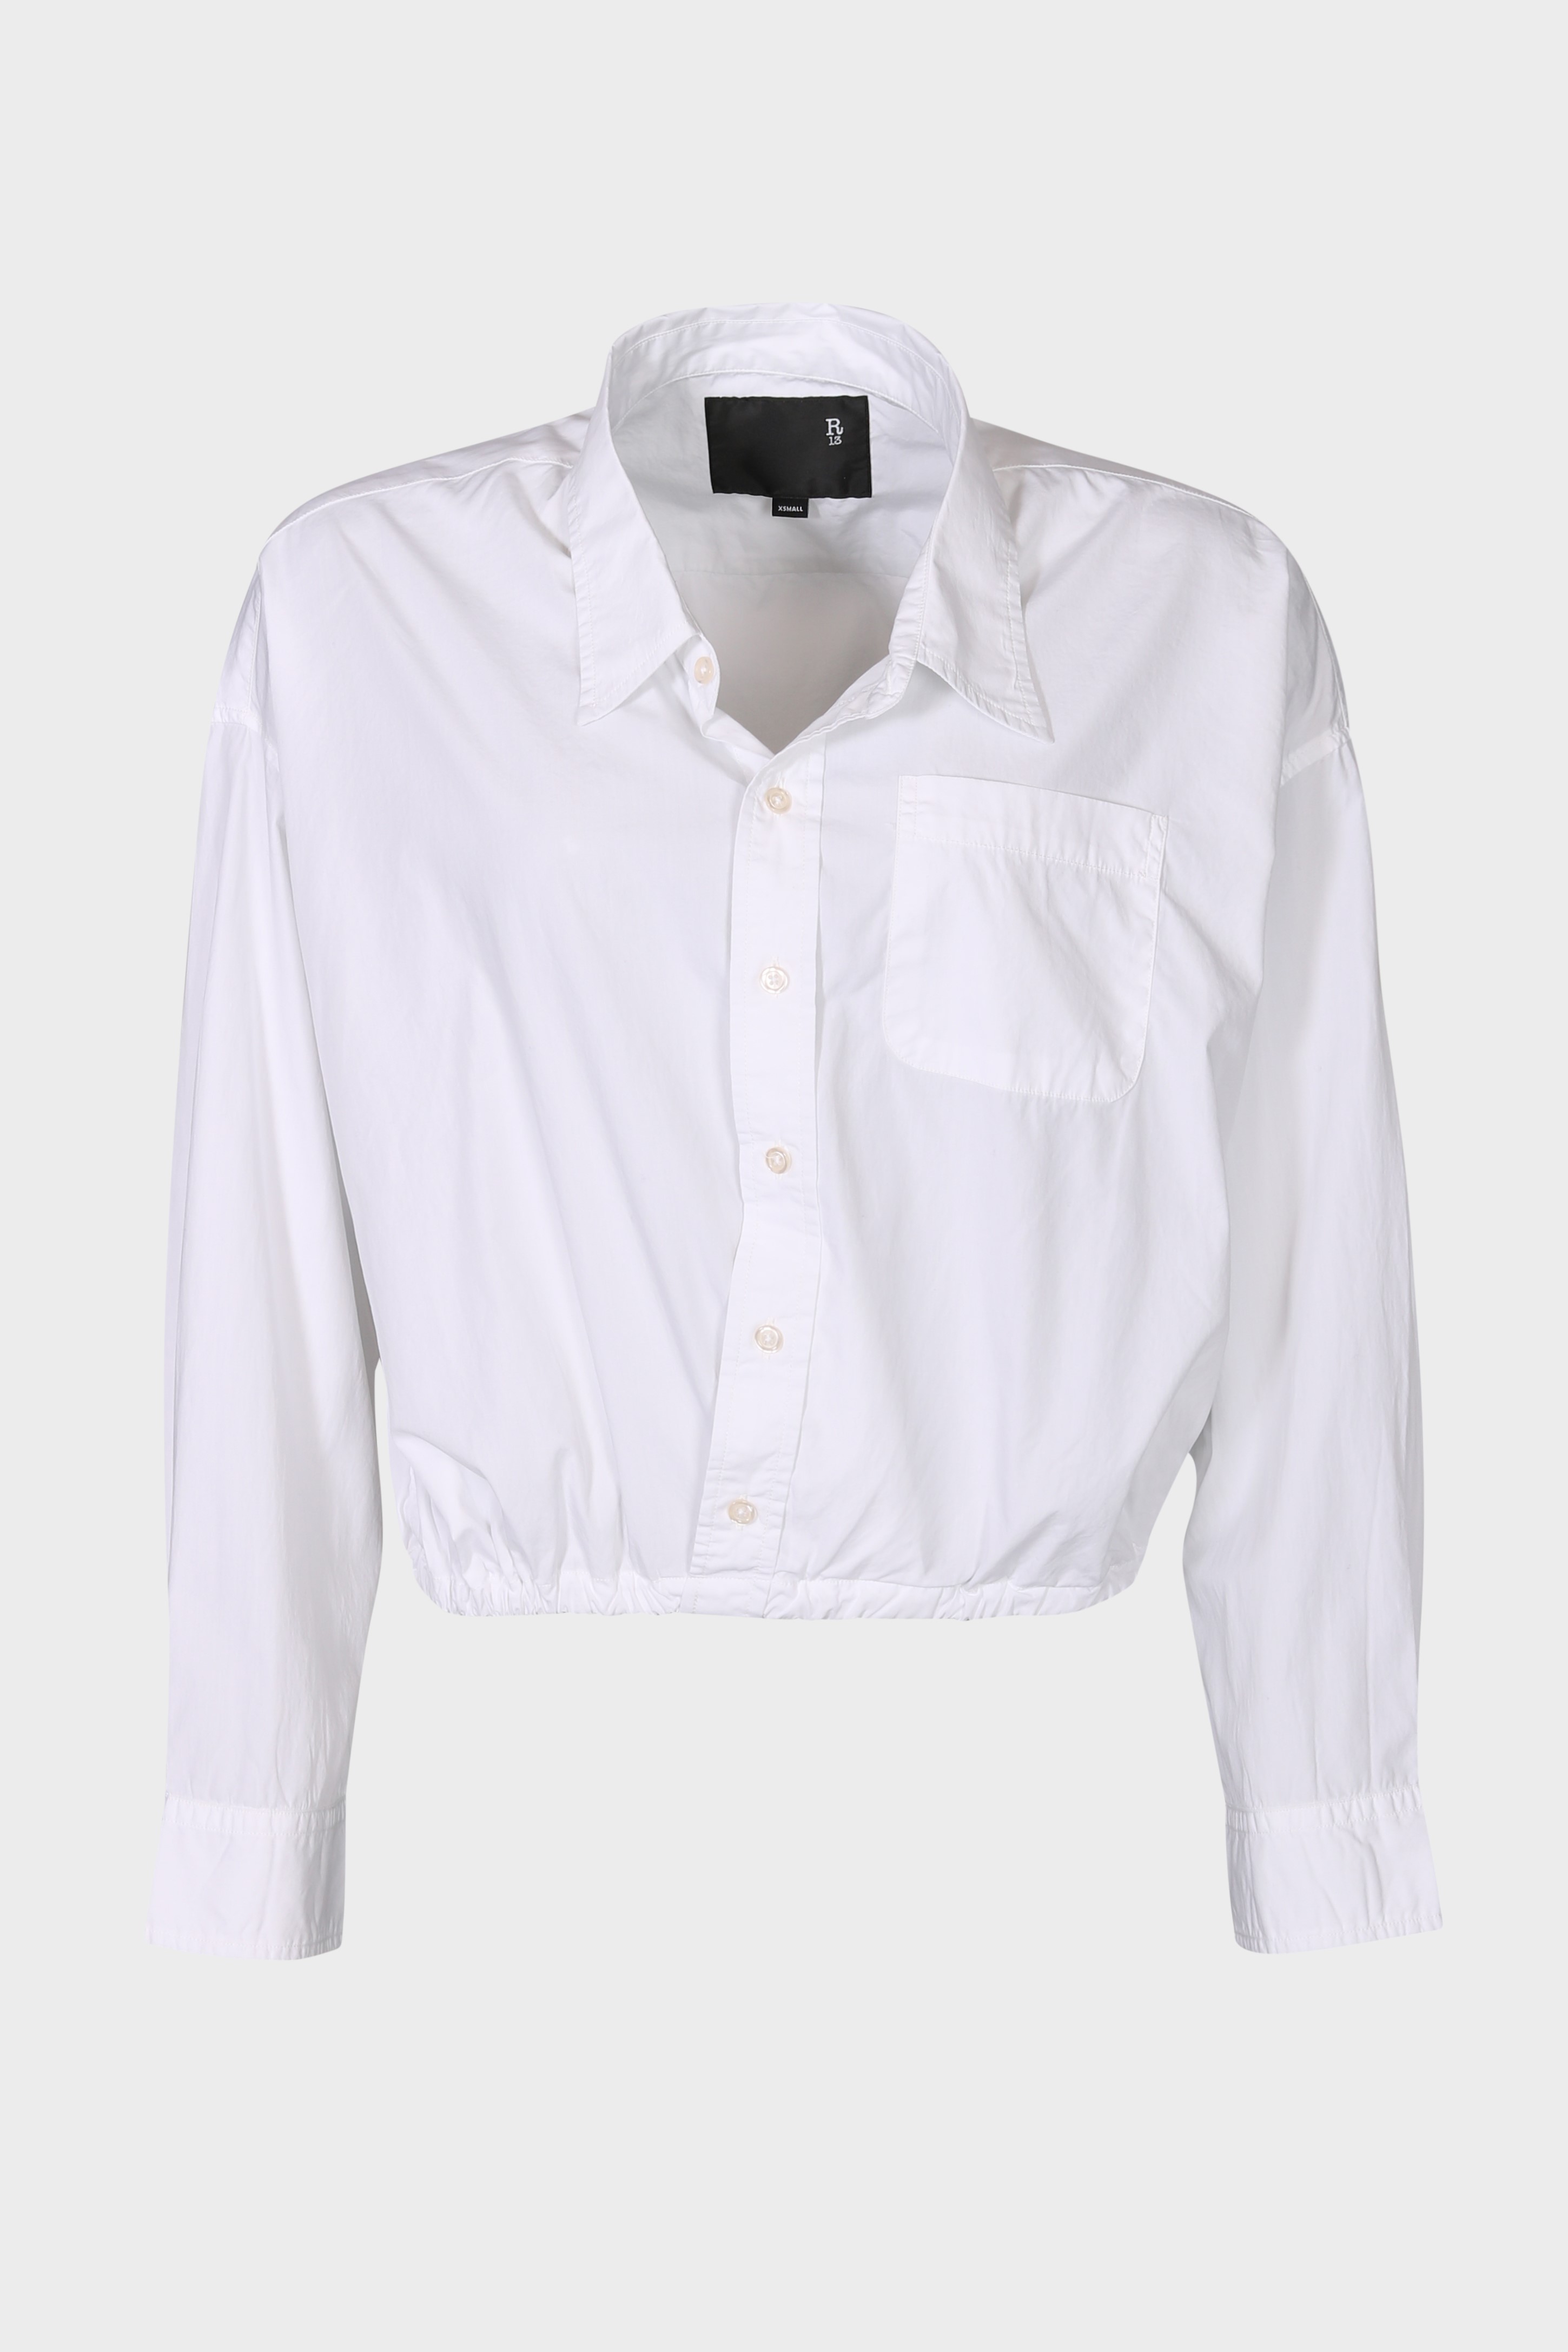 R13 Crossover Bubble Shirt in White M